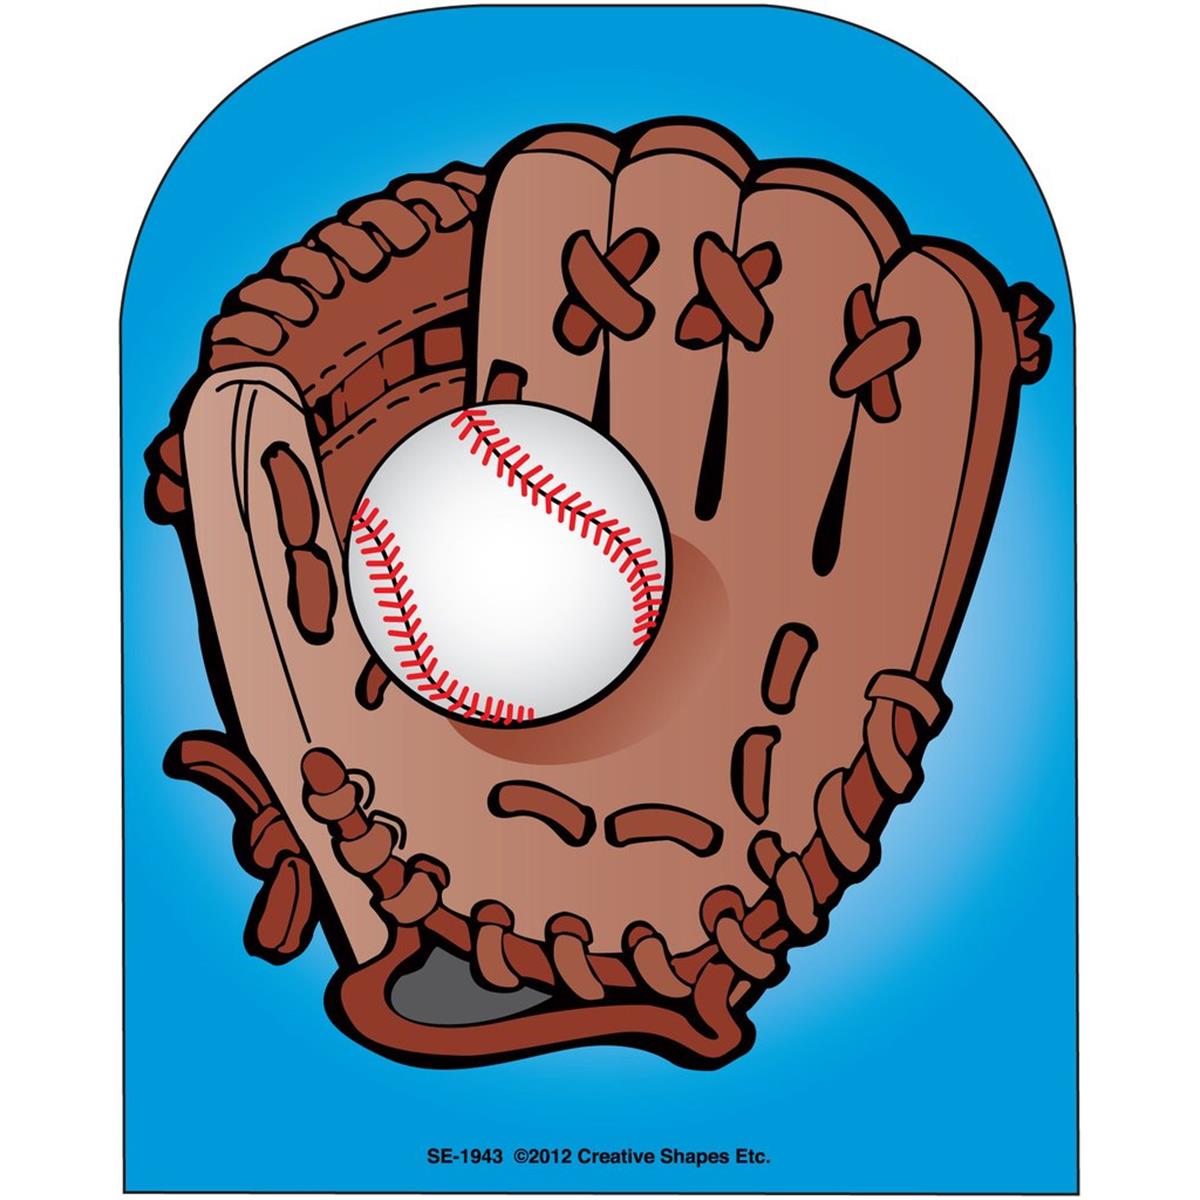 Se-1943 9 X 6 In. Large Notepad, Baseball Glove - 50 Sheets Per Pack